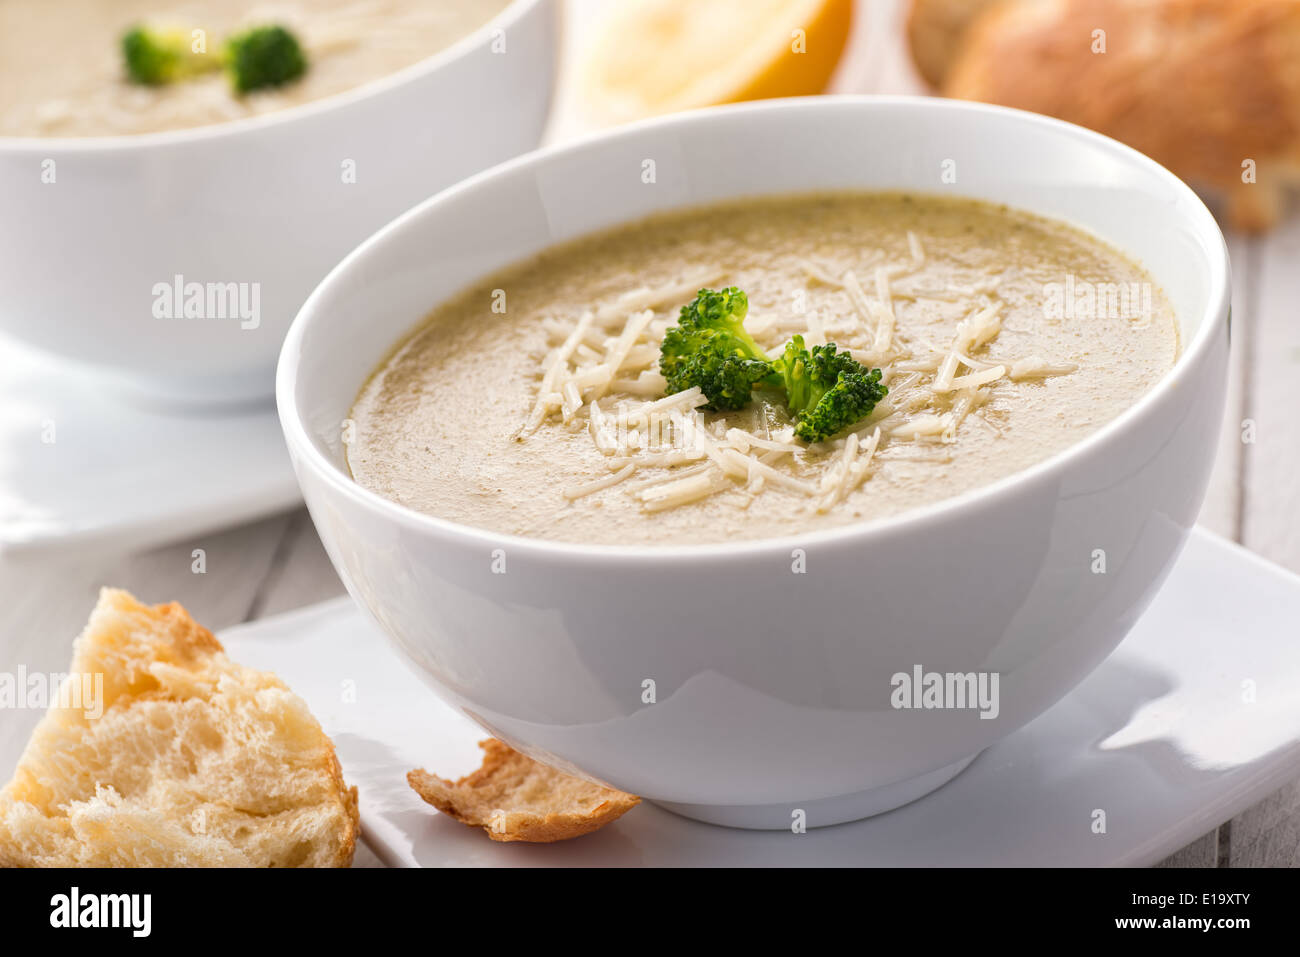 A delicious and healthy cream of brocolli and whole wheat couscous soup garnished with parmesan cheese. Stock Photo